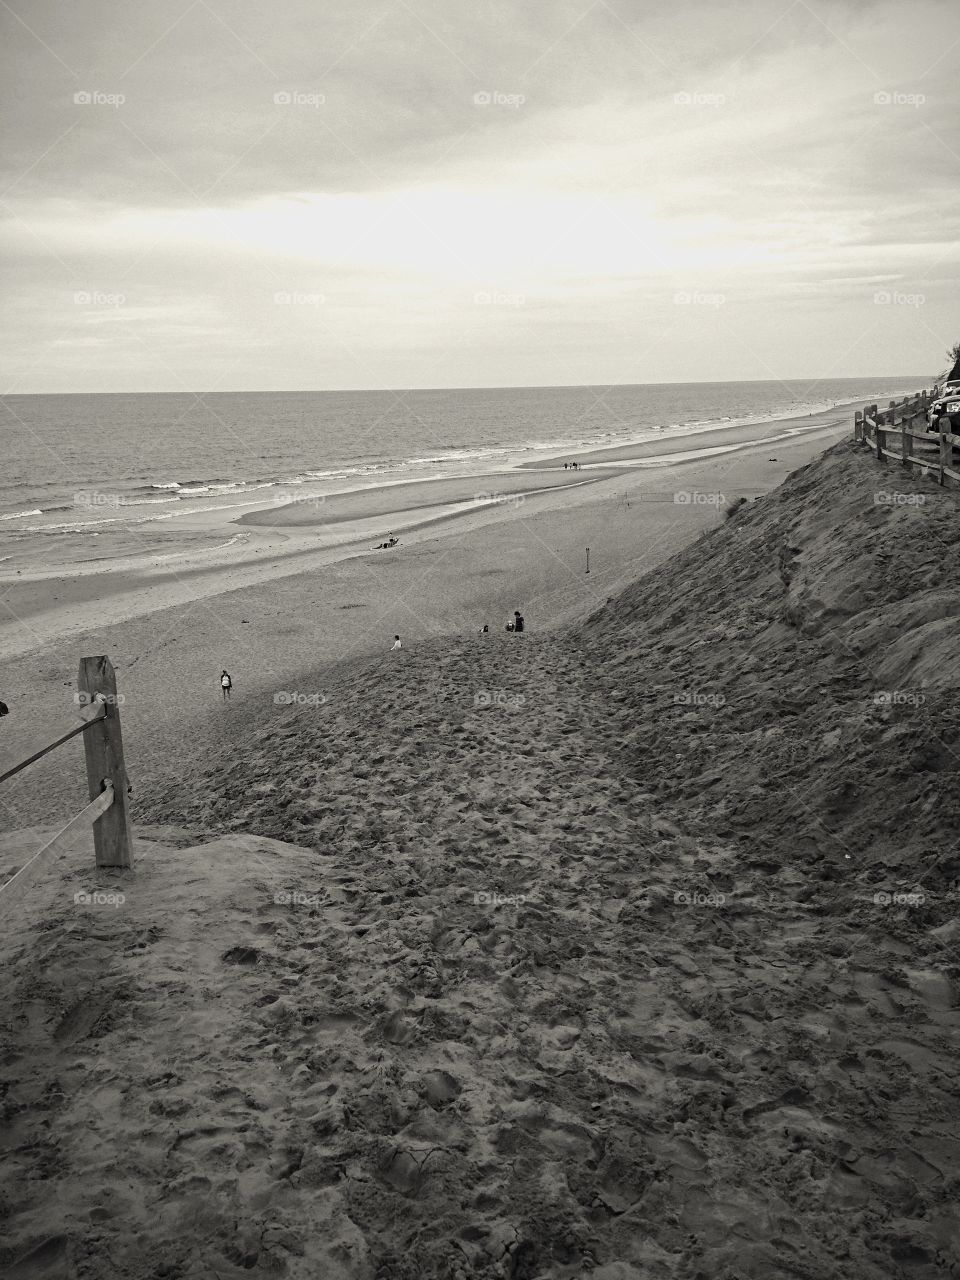 Looking down at the beach at the end of the day, Cape Cod, Massachusetts 